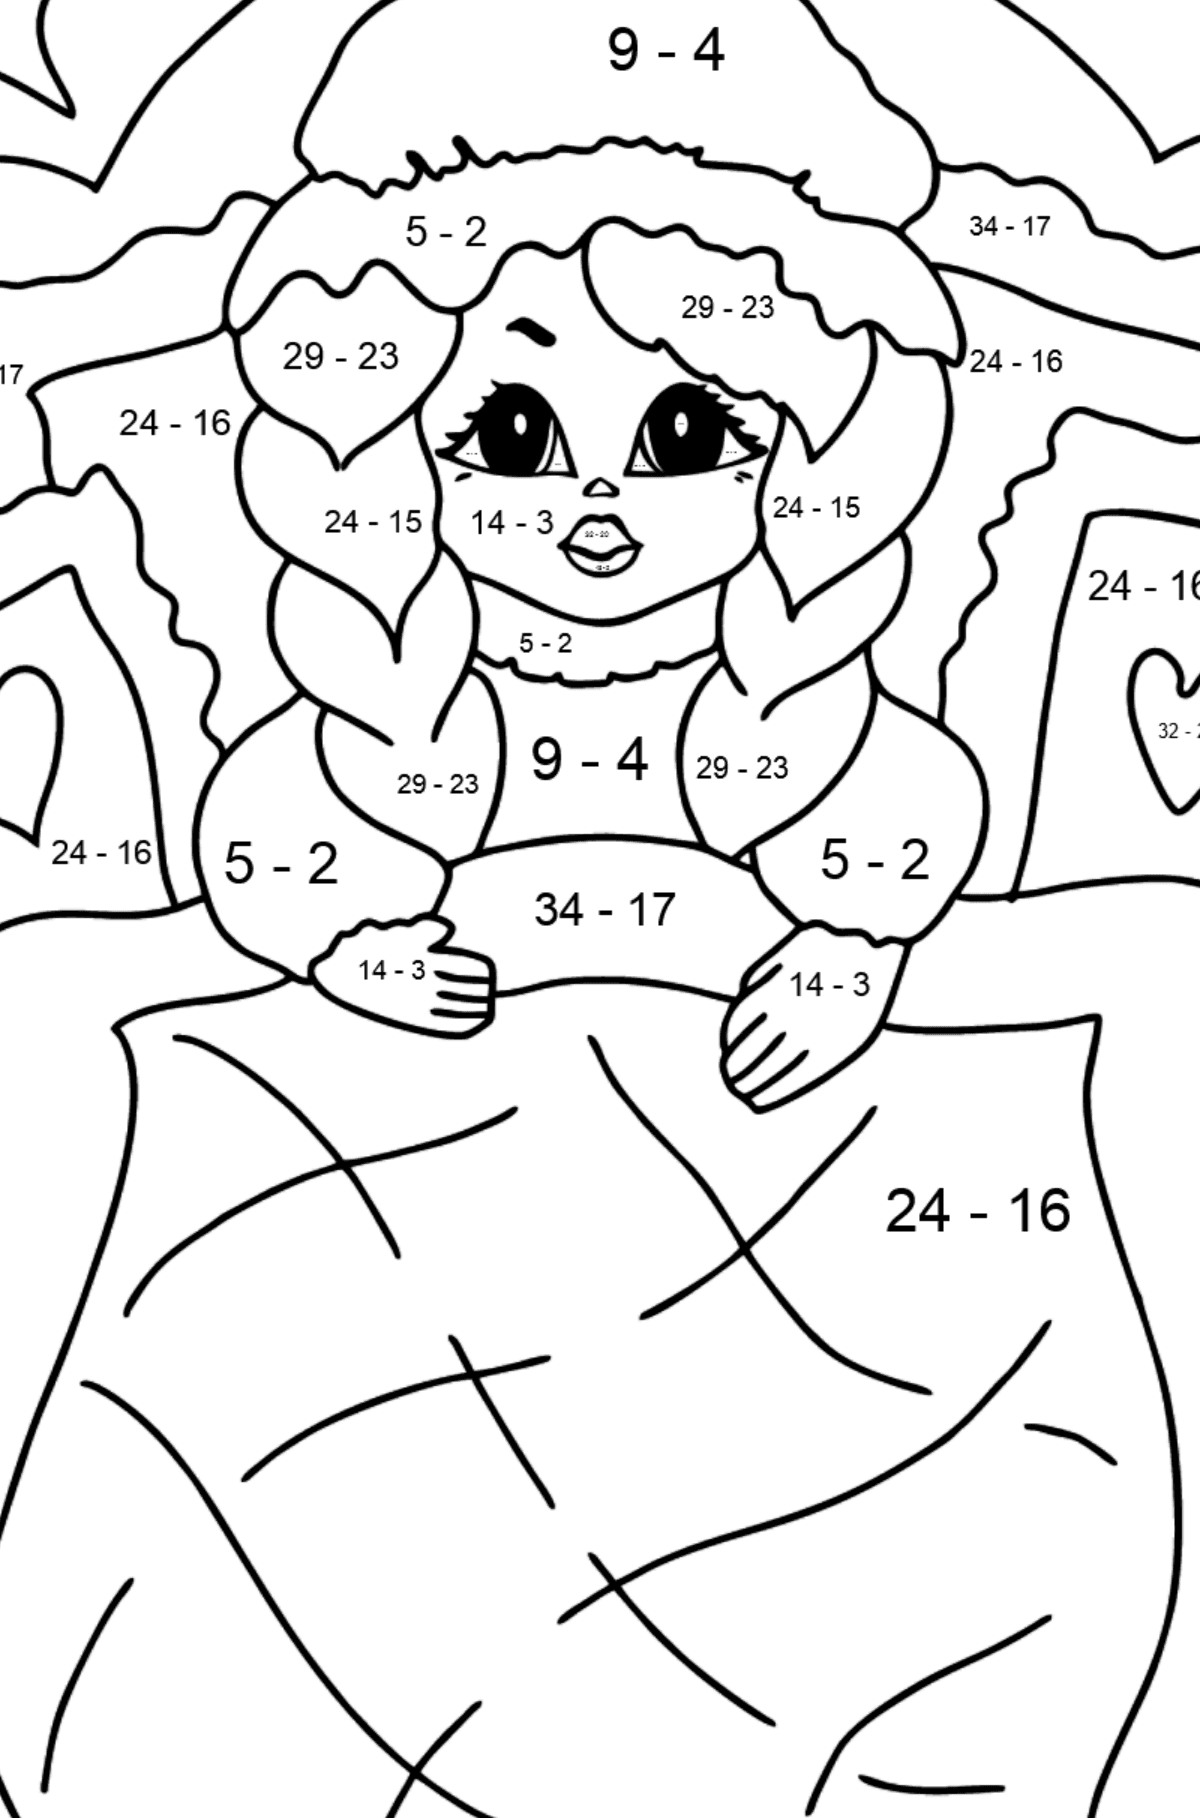 Coloring Page - A Princess in a Bed - for Girls - Math Coloring - Subtraction for Kids